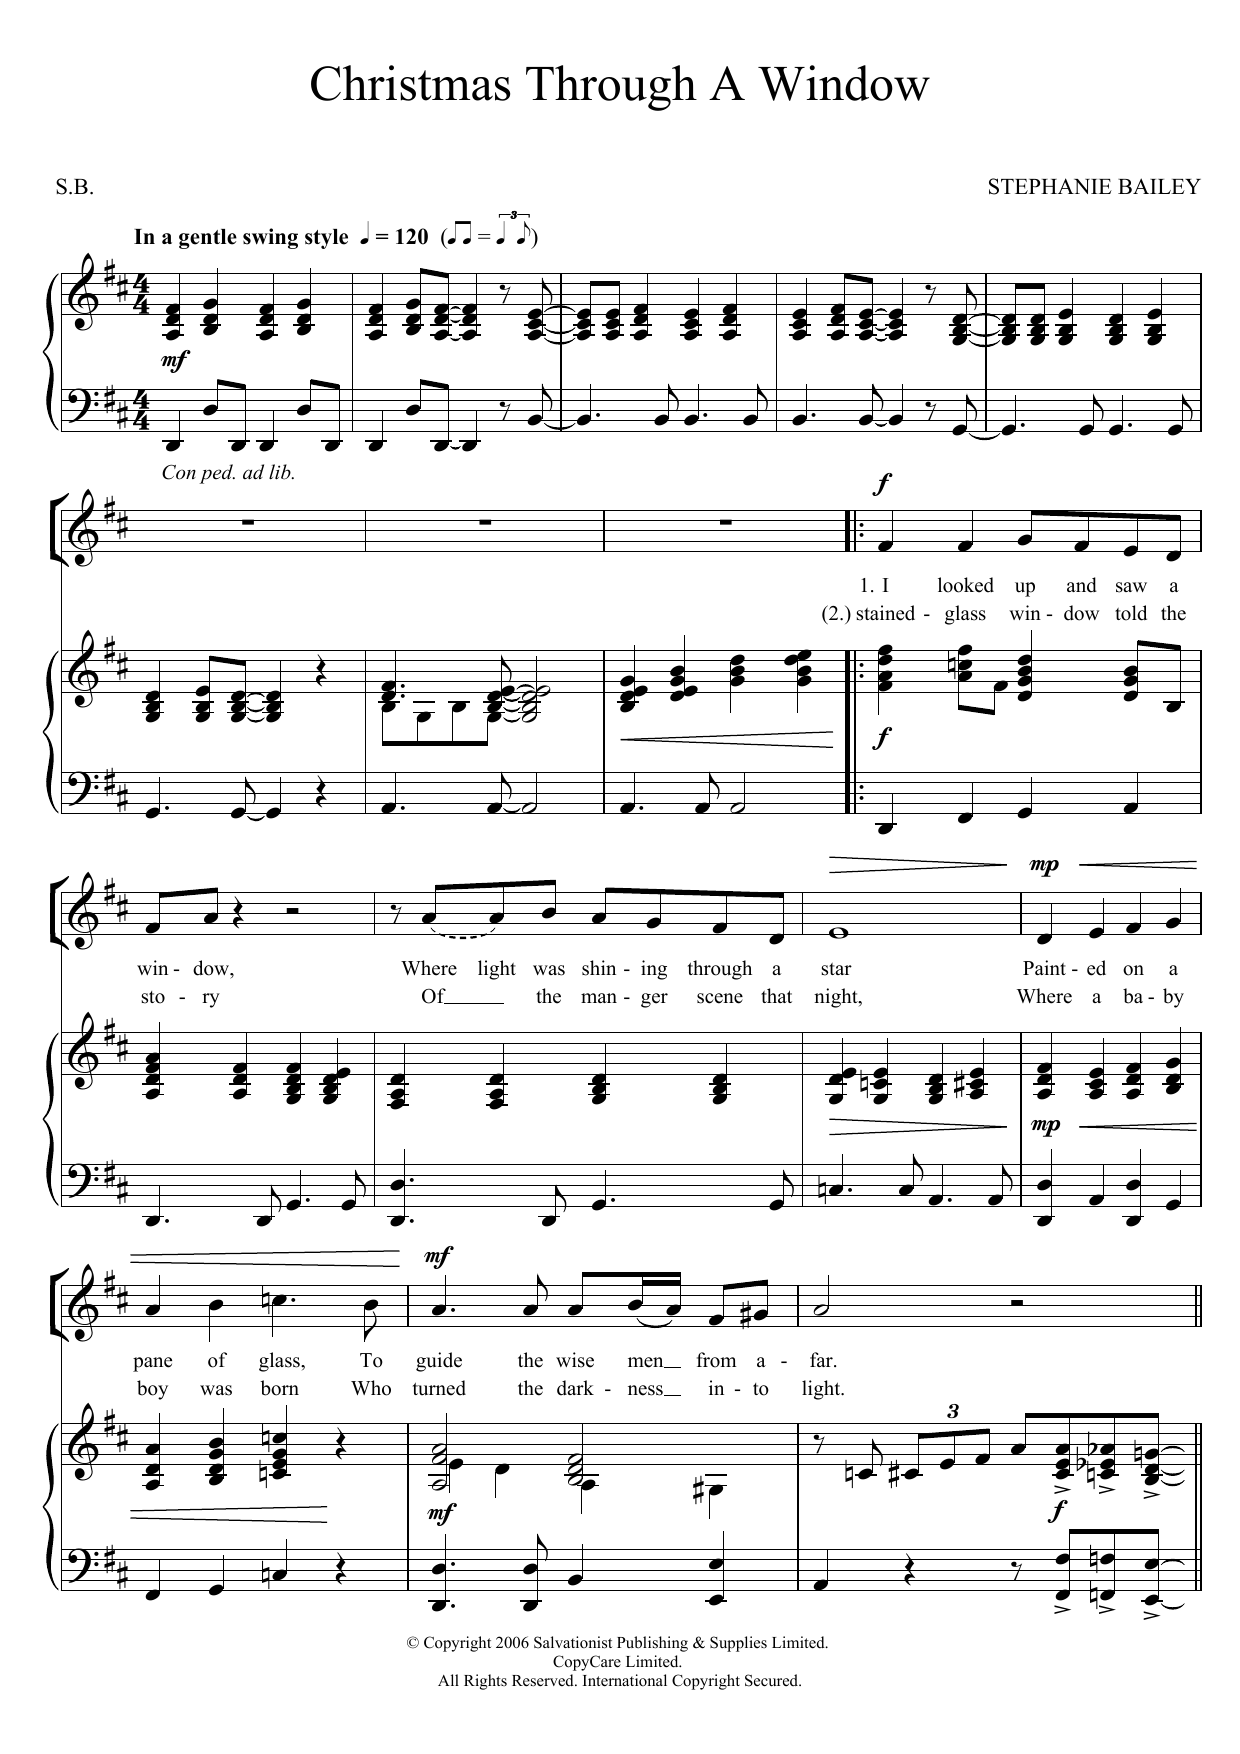 Download The Salvation Army Christmas Through A Window Sheet Music